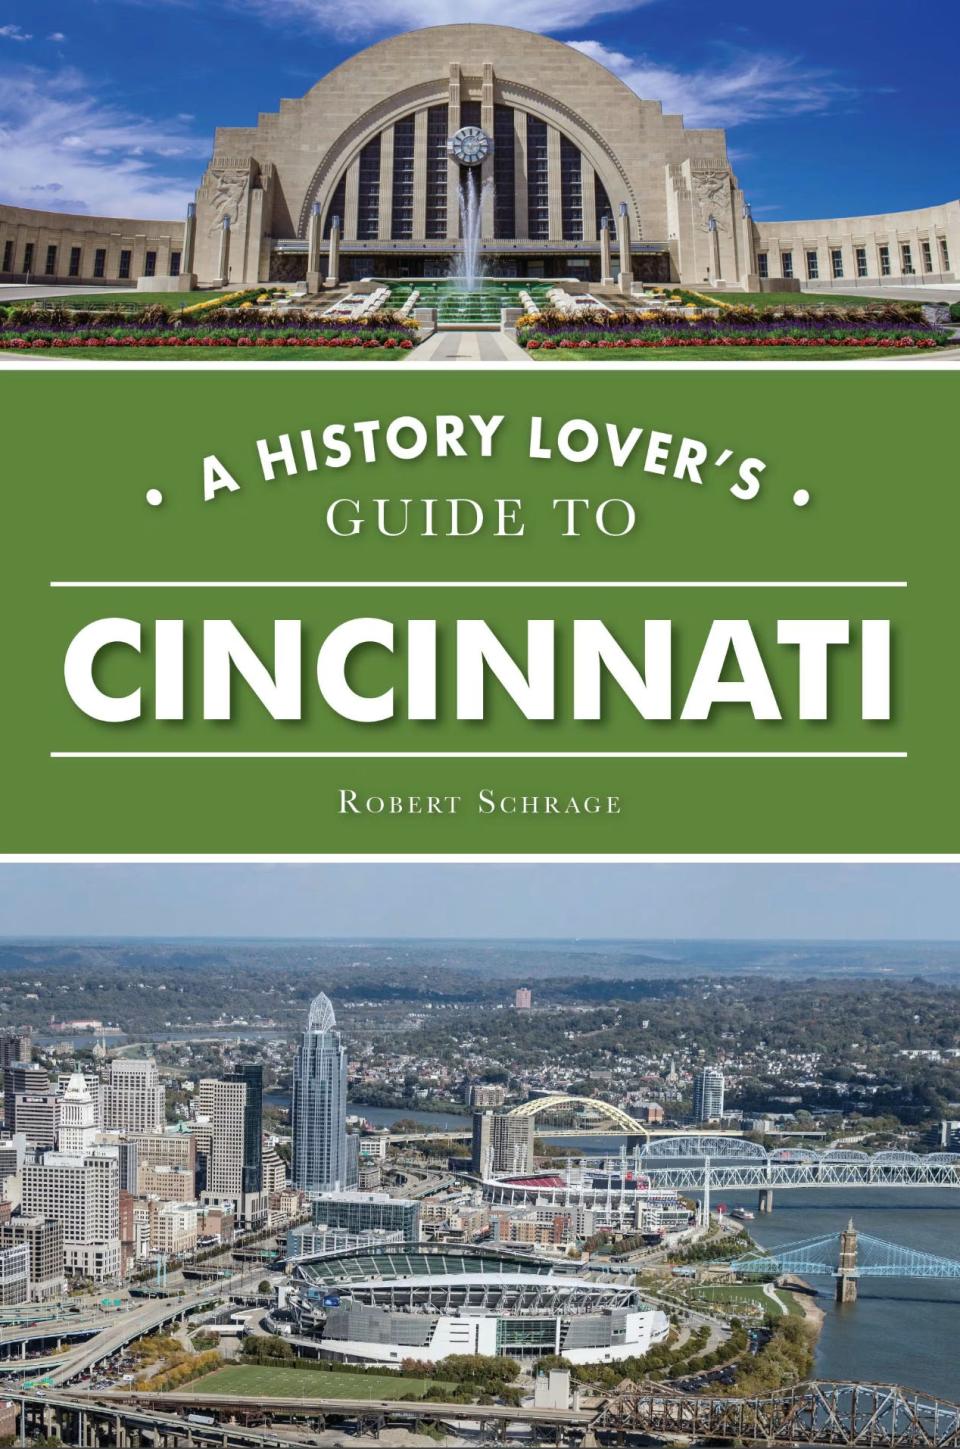 “A History Lover’s Guide to Cincinnati” by Robert Schrage covers the usual landmarks but also delves into the remnants and markers.